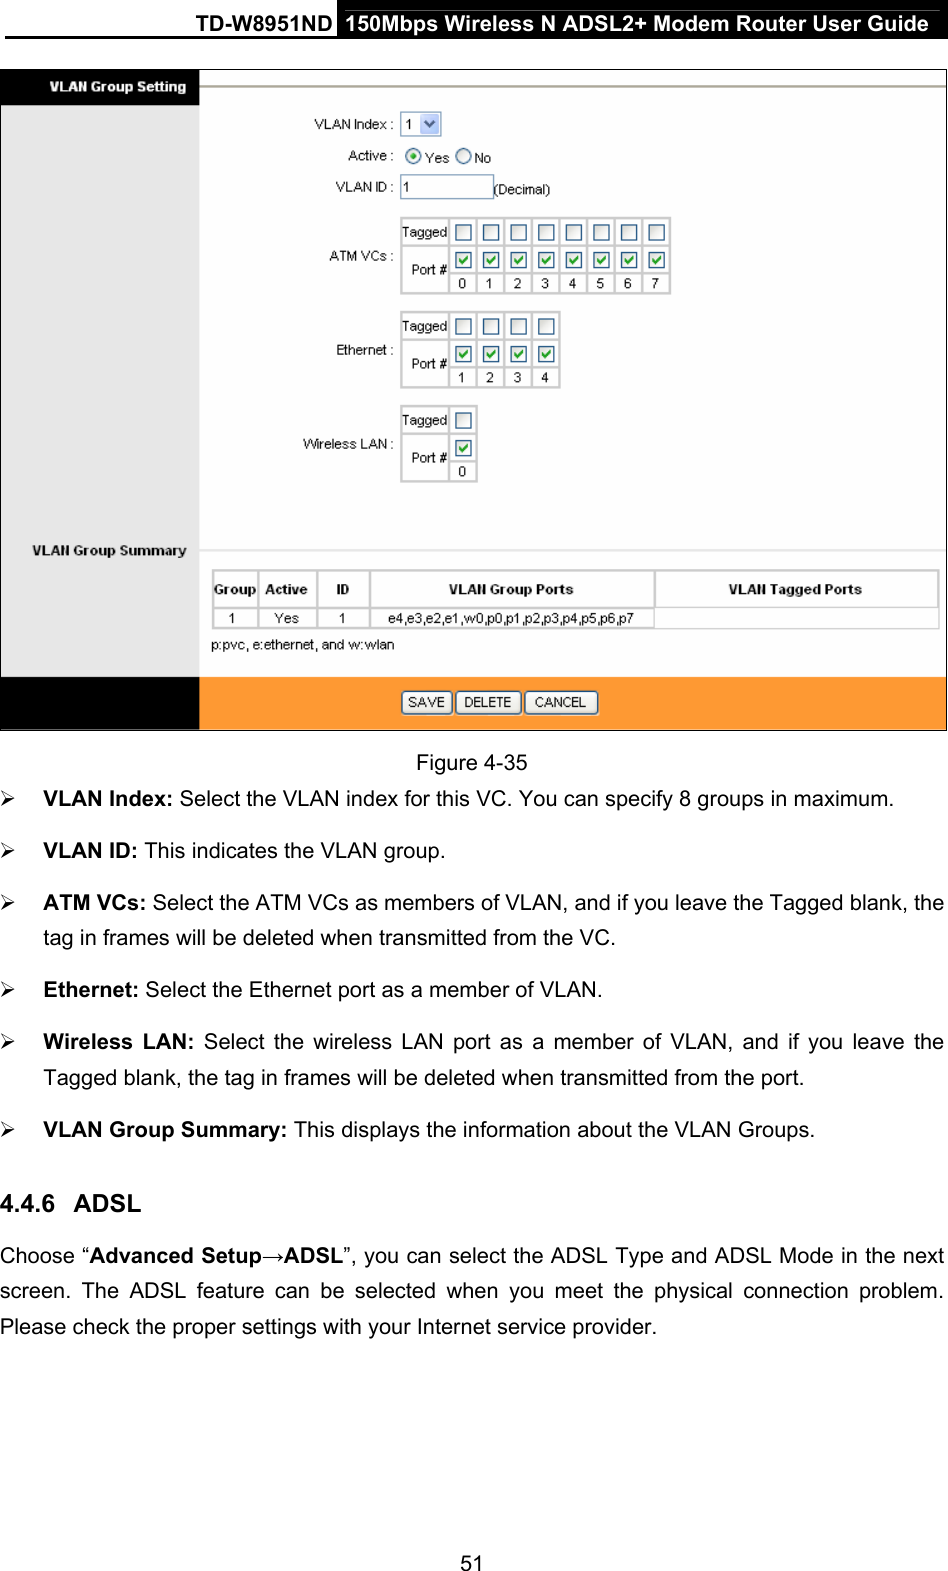 TD-W8951ND  150Mbps Wireless N ADSL2+ Modem Router User Guide  Figure 4-35 ¾ VLAN Index: Select the VLAN index for this VC. You can specify 8 groups in maximum. ¾ VLAN ID: This indicates the VLAN group. ¾ ATM VCs: Select the ATM VCs as members of VLAN, and if you leave the Tagged blank, the tag in frames will be deleted when transmitted from the VC. ¾ Ethernet: Select the Ethernet port as a member of VLAN. ¾ Wireless LAN: Select the wireless LAN port as a member of VLAN, and if you leave the Tagged blank, the tag in frames will be deleted when transmitted from the port. ¾ VLAN Group Summary: This displays the information about the VLAN Groups. 4.4.6  ADSL Choose “Advanced Setup→ADSL”, you can select the ADSL Type and ADSL Mode in the next screen. The ADSL feature can be selected when you meet the physical connection problem. Please check the proper settings with your Internet service provider. 51 